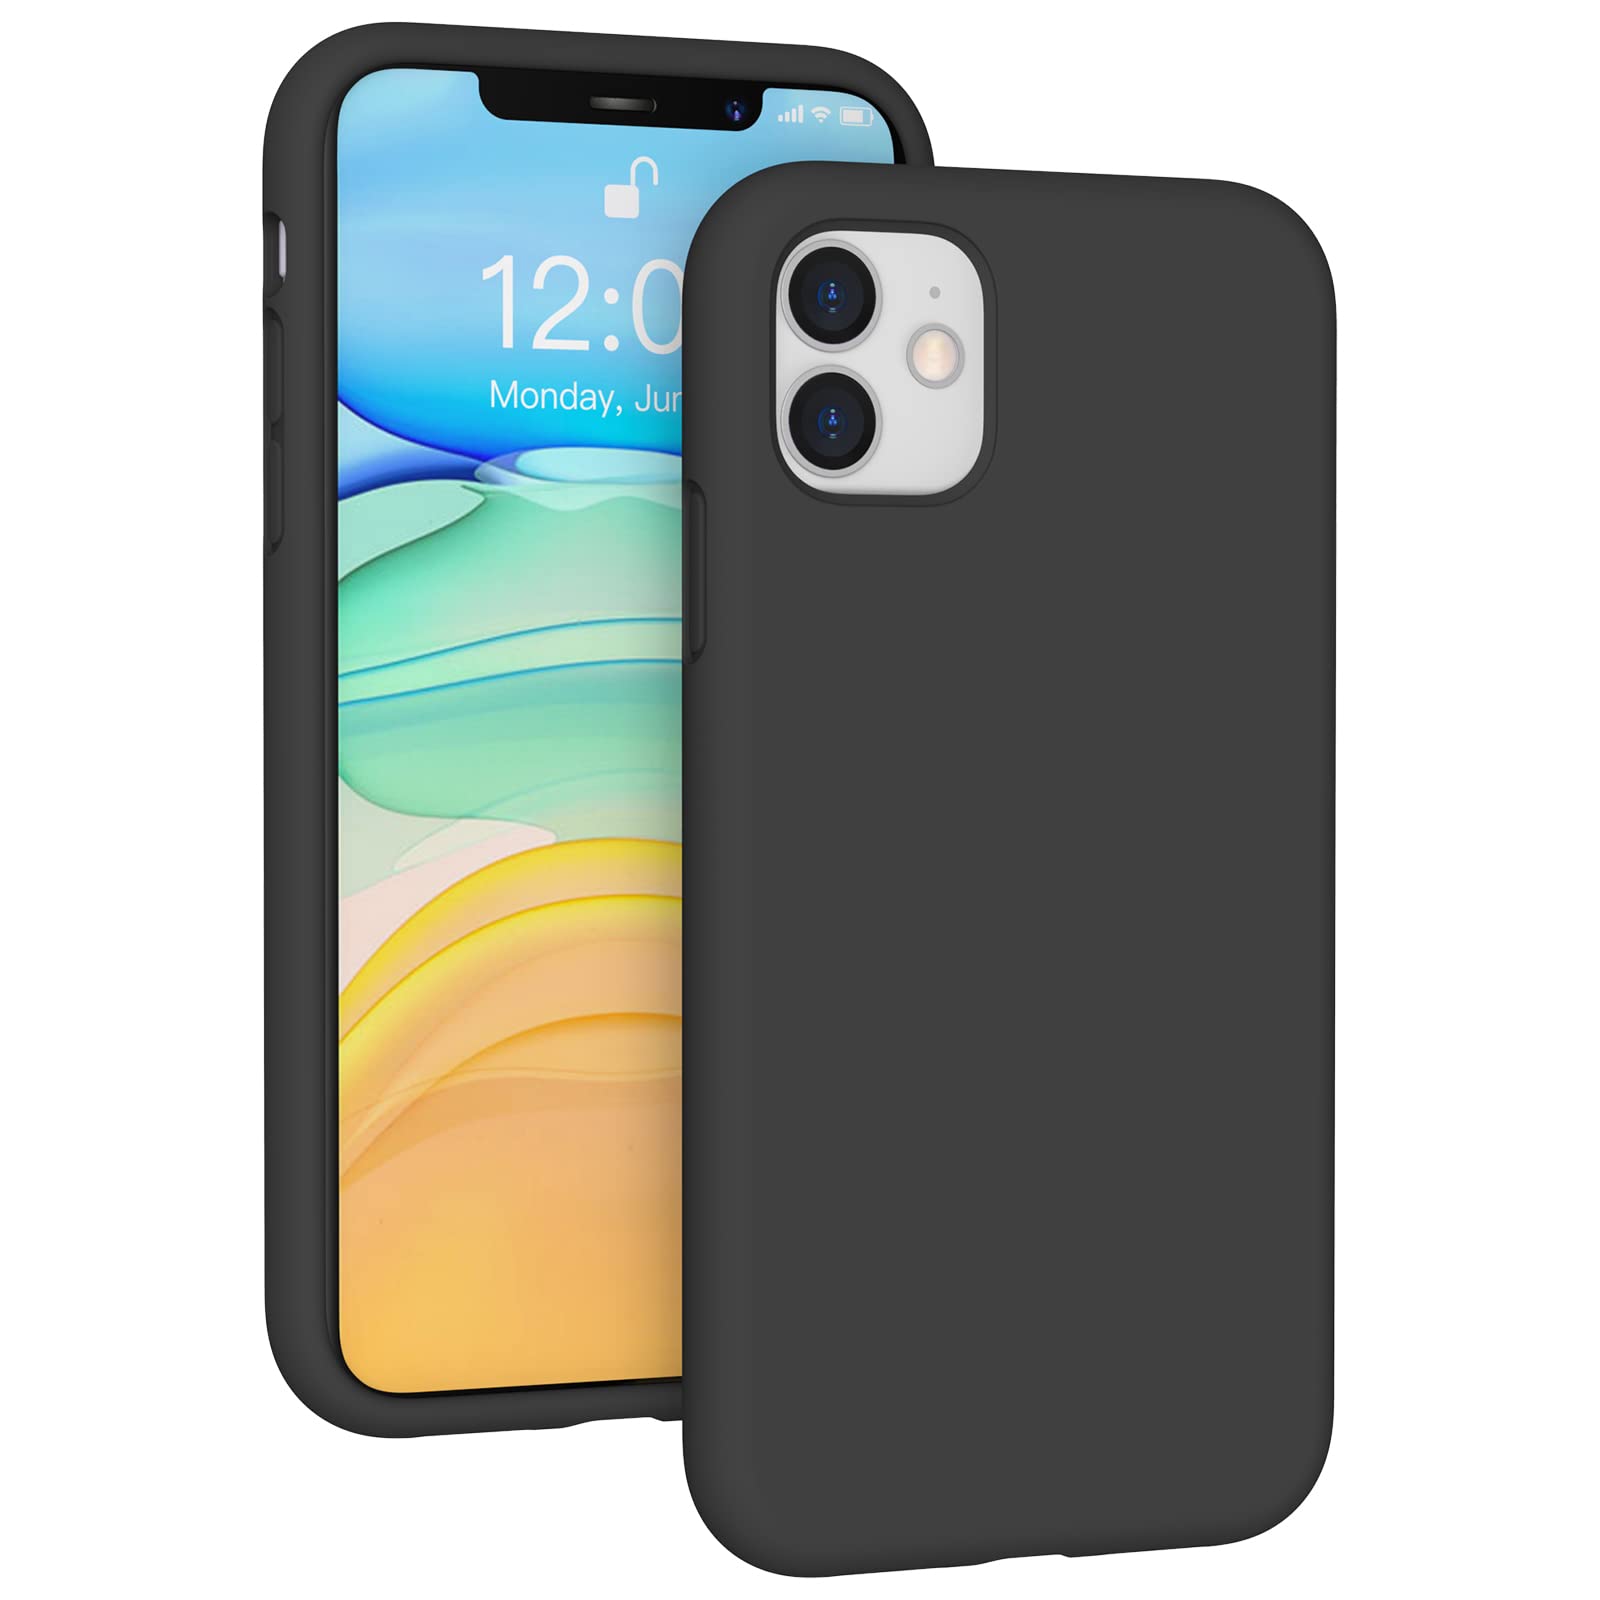 K TOMOTO Liquid Silicone case compatible with iPhone 11 (61), Full Body Protection gel Rubber cover with Soft Microfiber